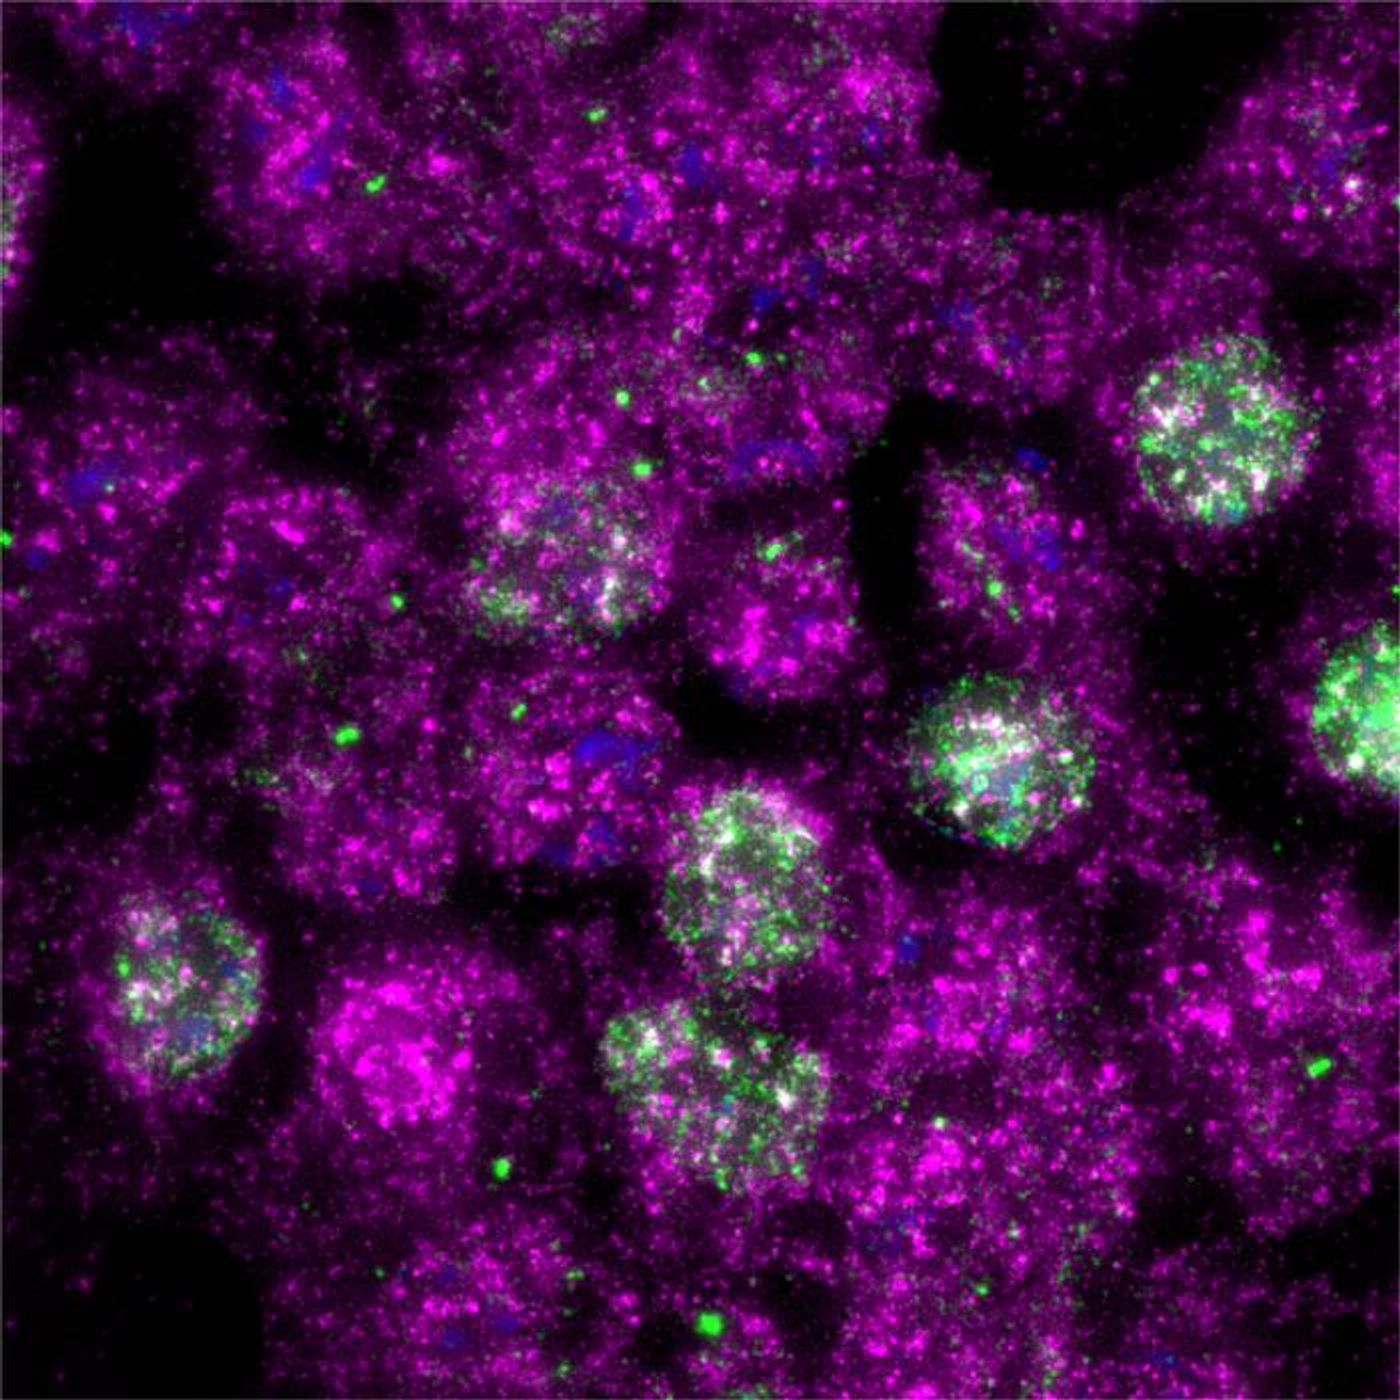 Immediately after UV exposure, ribosomes activate a widespread life-or-death pathway (pink), which is more pervasive than the DNA-initiated response (green). / Credit: Zhong Yeow and Niladri Sinha